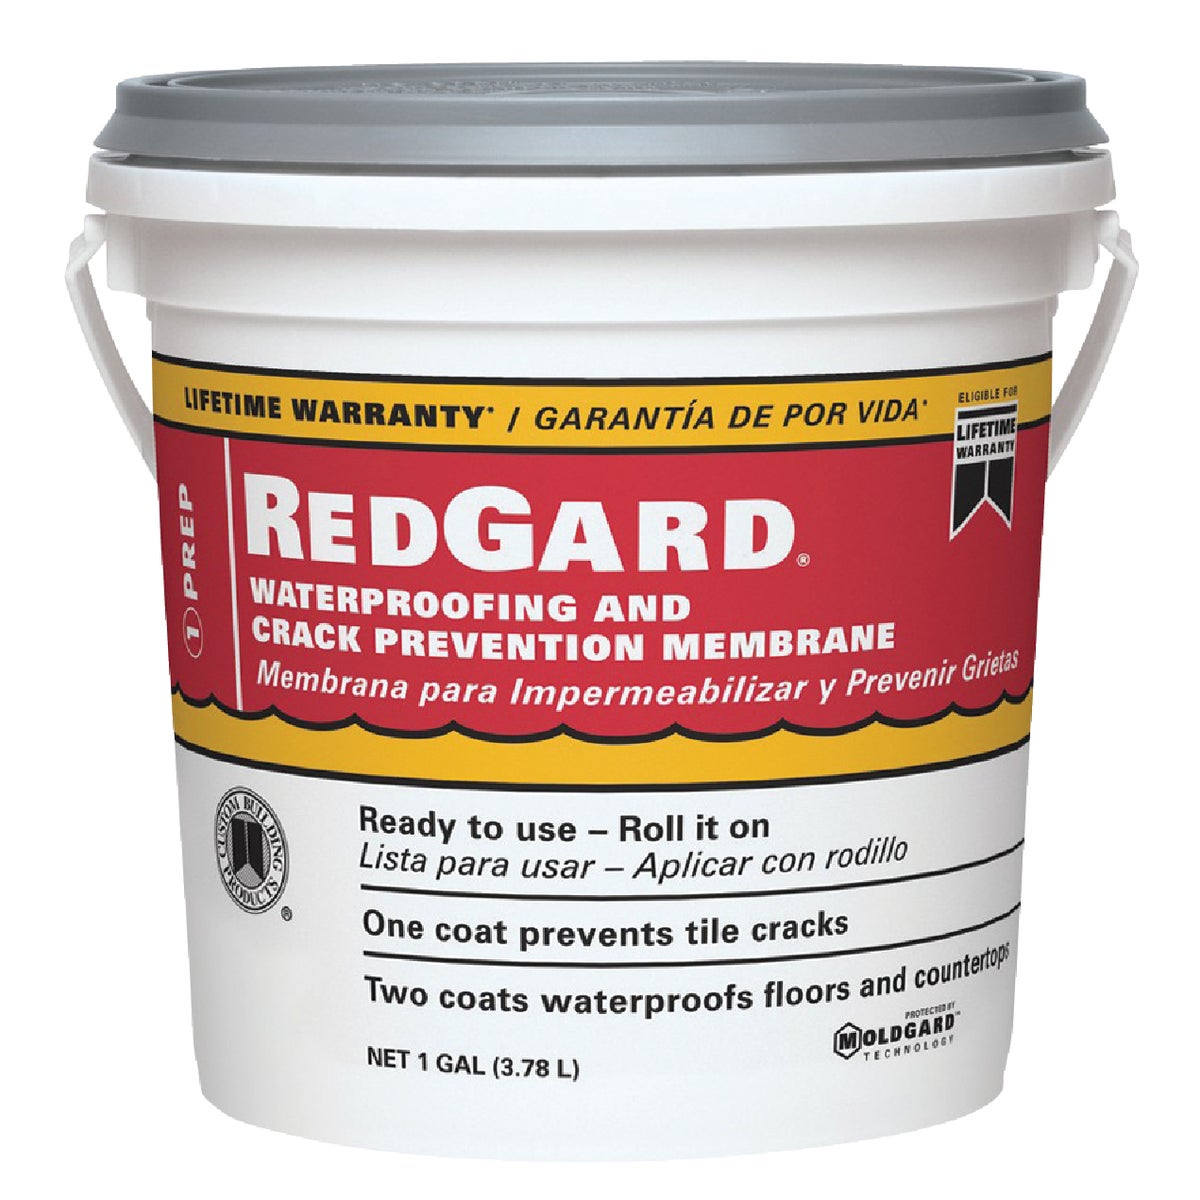 Item 272895, Ready-to-use elastometric, waterproofing and crack prevention membrane for 